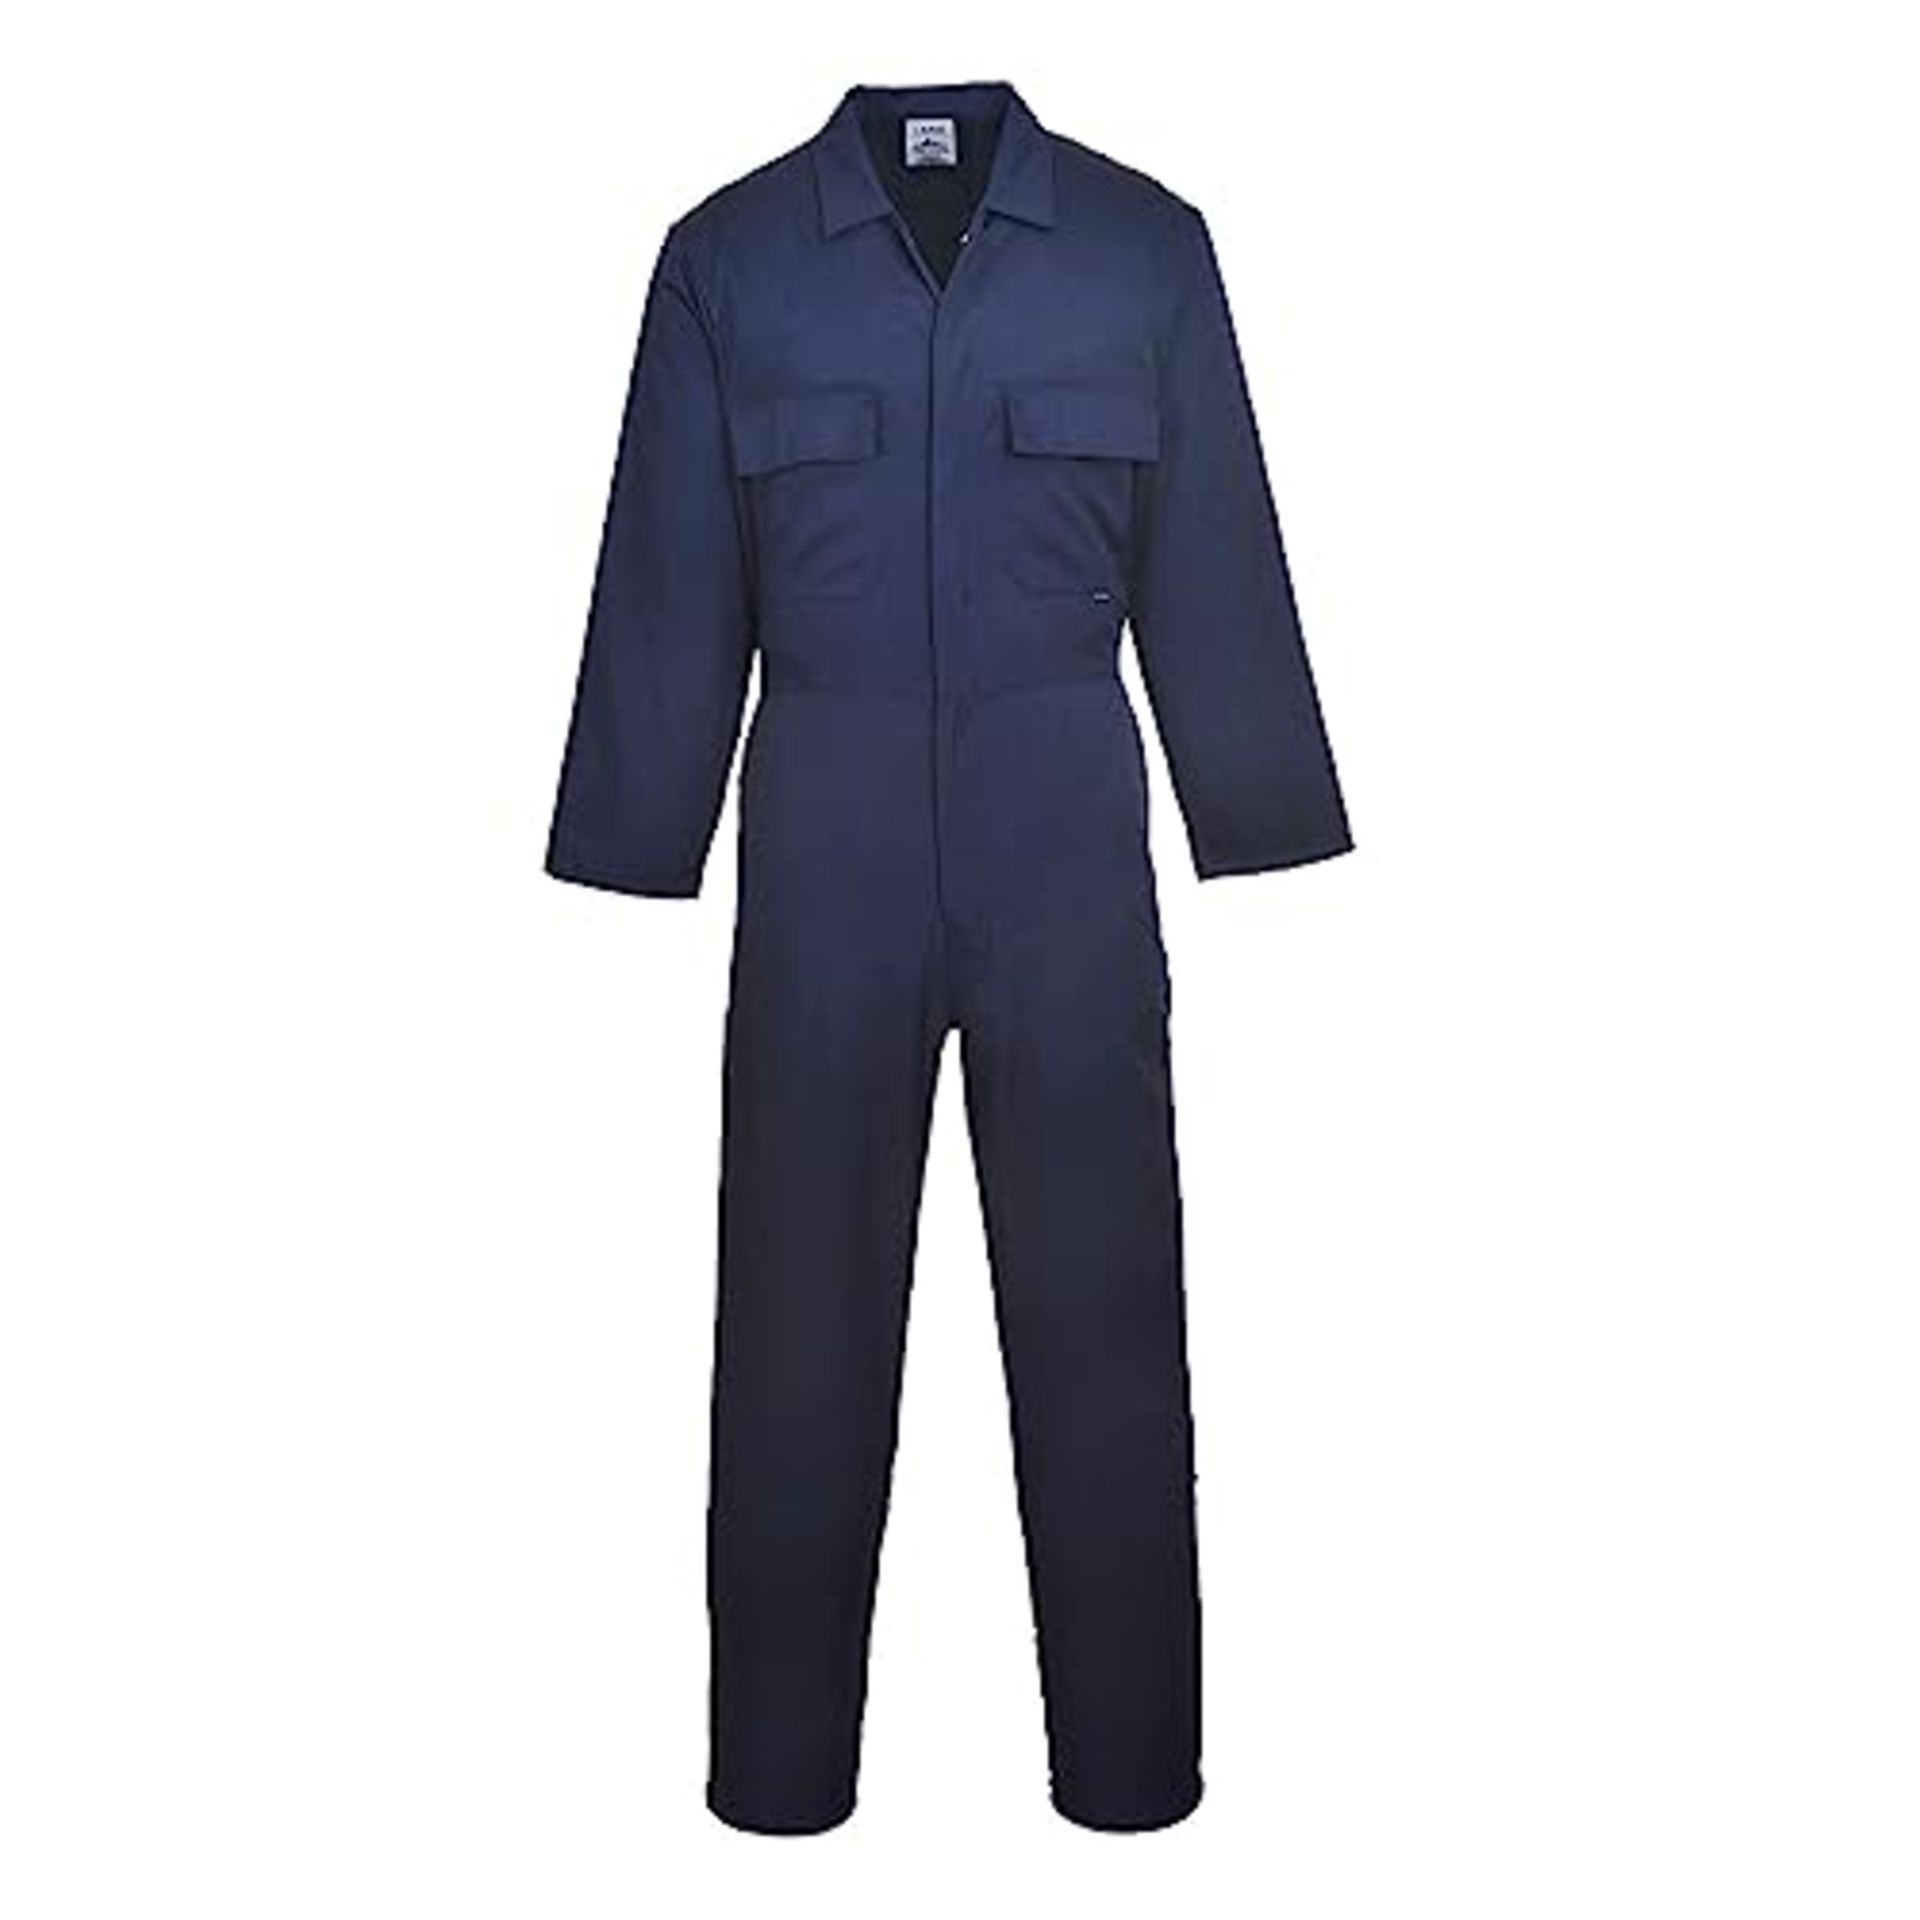 Portwest S999 Men's Euro Workwear Polycotton Coverall Boiler Suit Overalls Navy, M